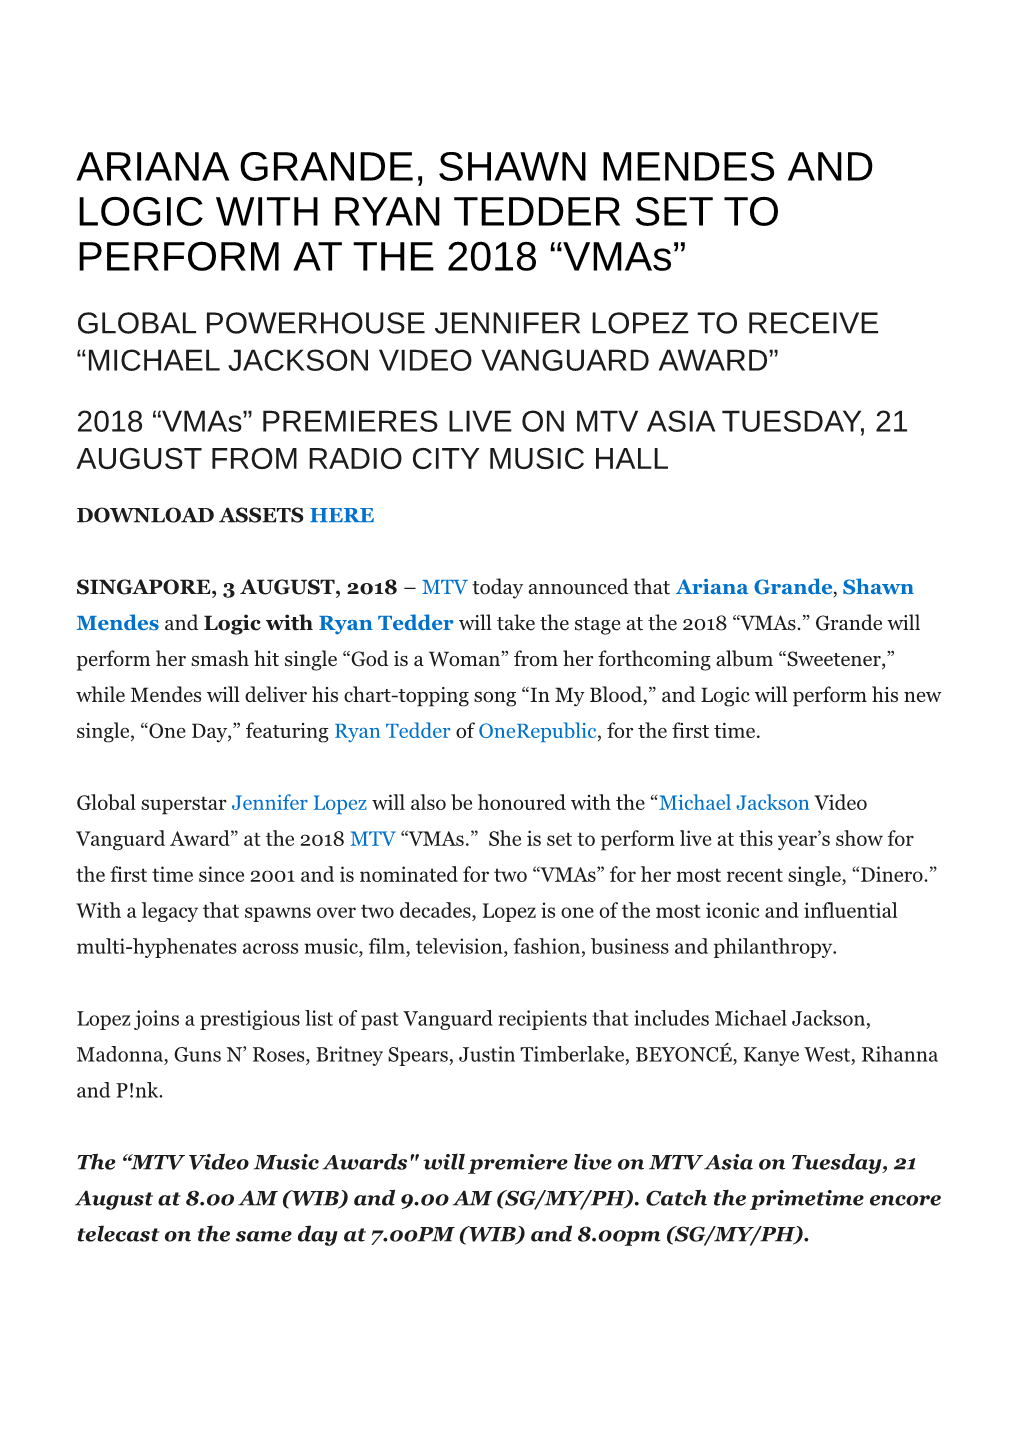 ARIANA GRANDE, SHAWN MENDES and LOGIC with RYAN TEDDER SET to PERFORM at the 2018 “Vmas”